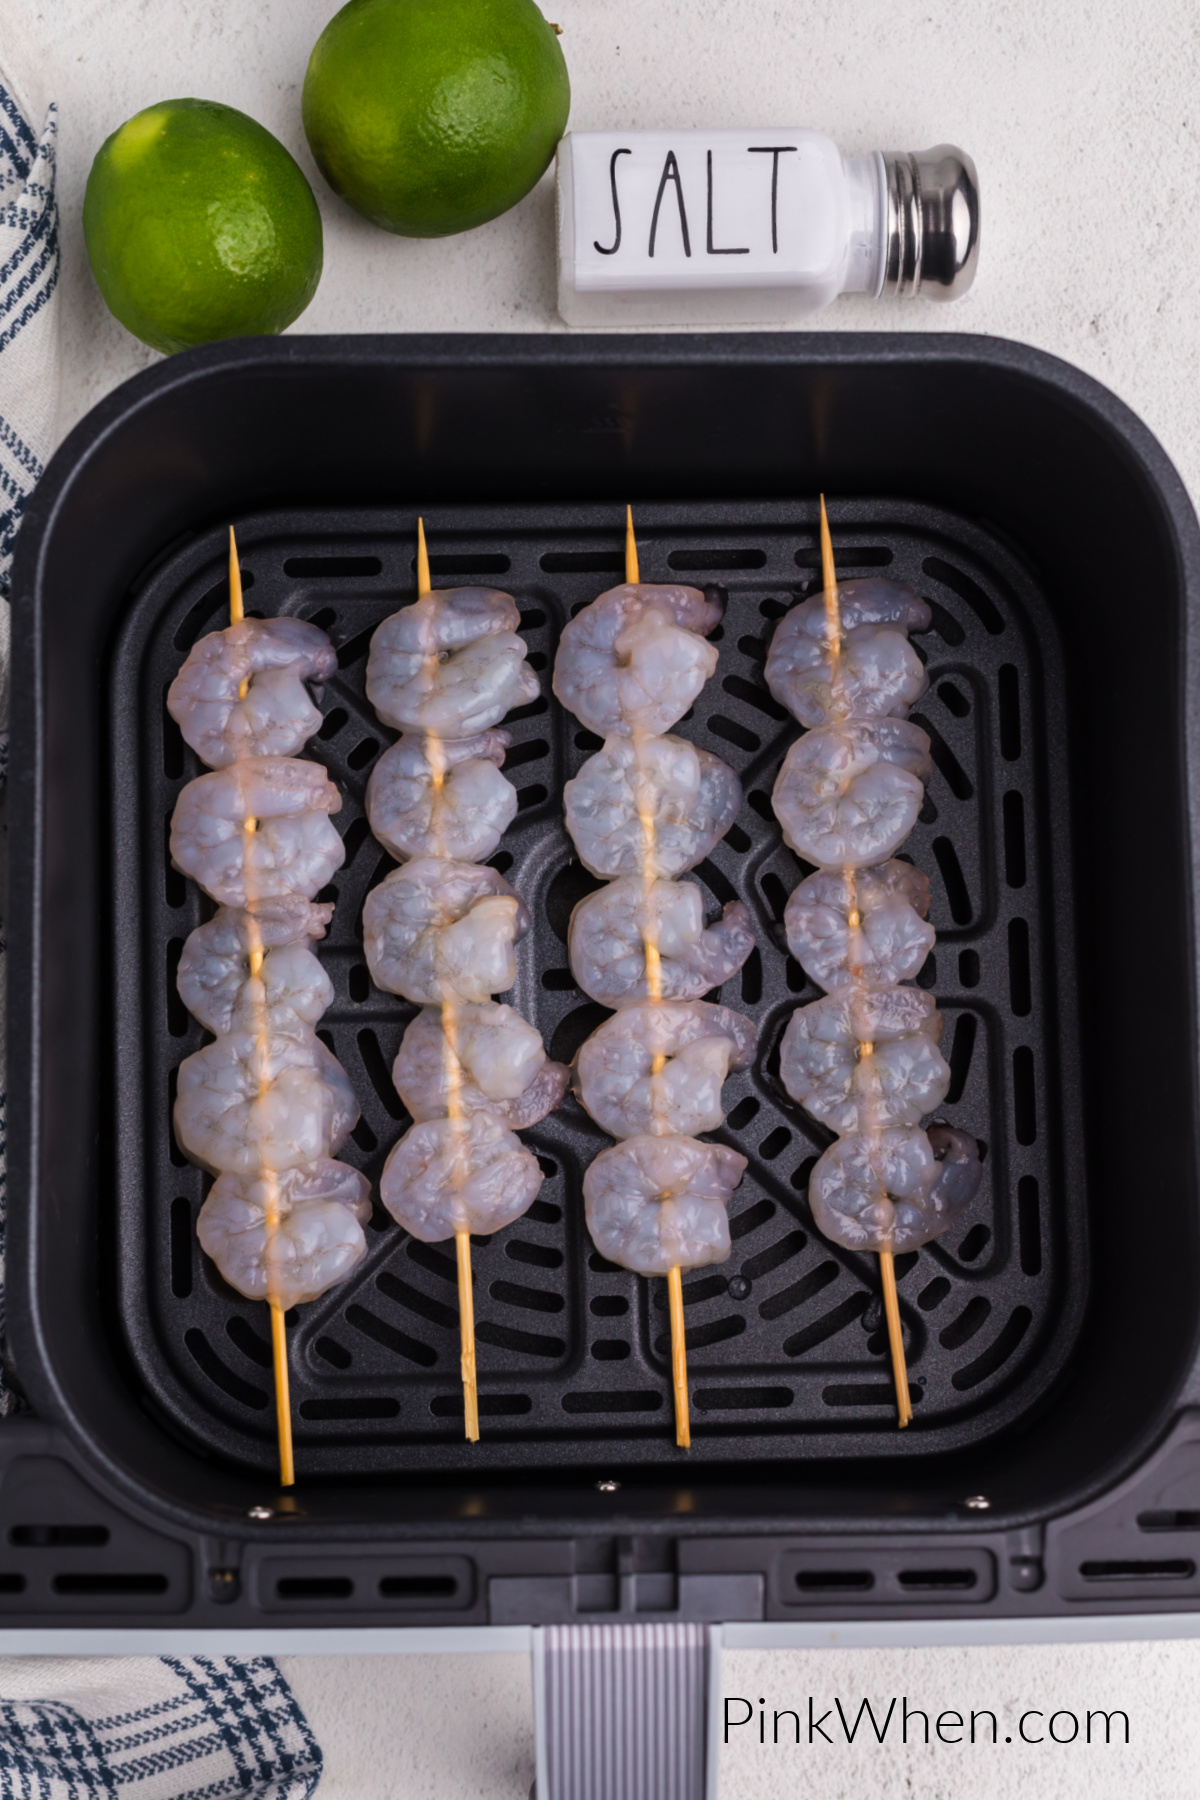 Shrimp skewers in the air fryer basket ready to cook.